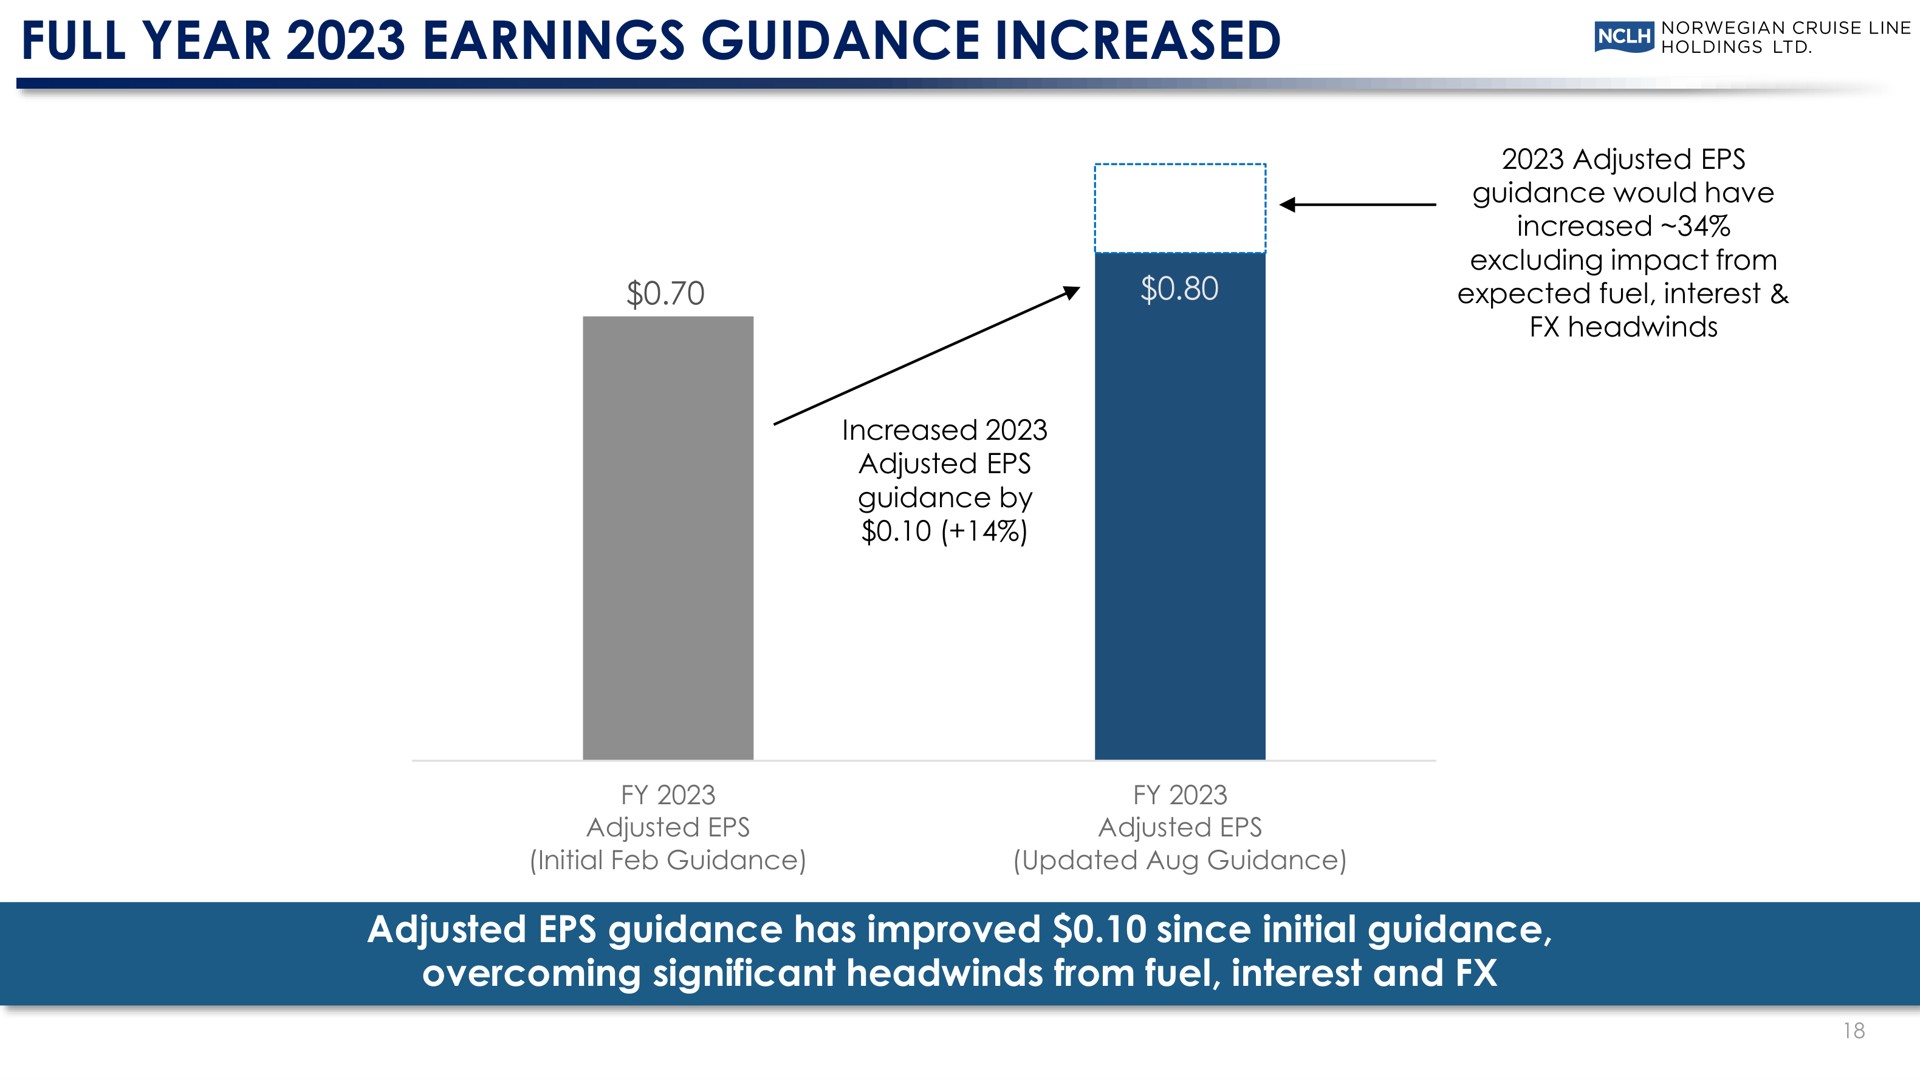 full year earnings guidance increased adjusted guidance has improved since initial guidance overcoming significant from fuel interest and ted shinny | Norwegian Cruise Line